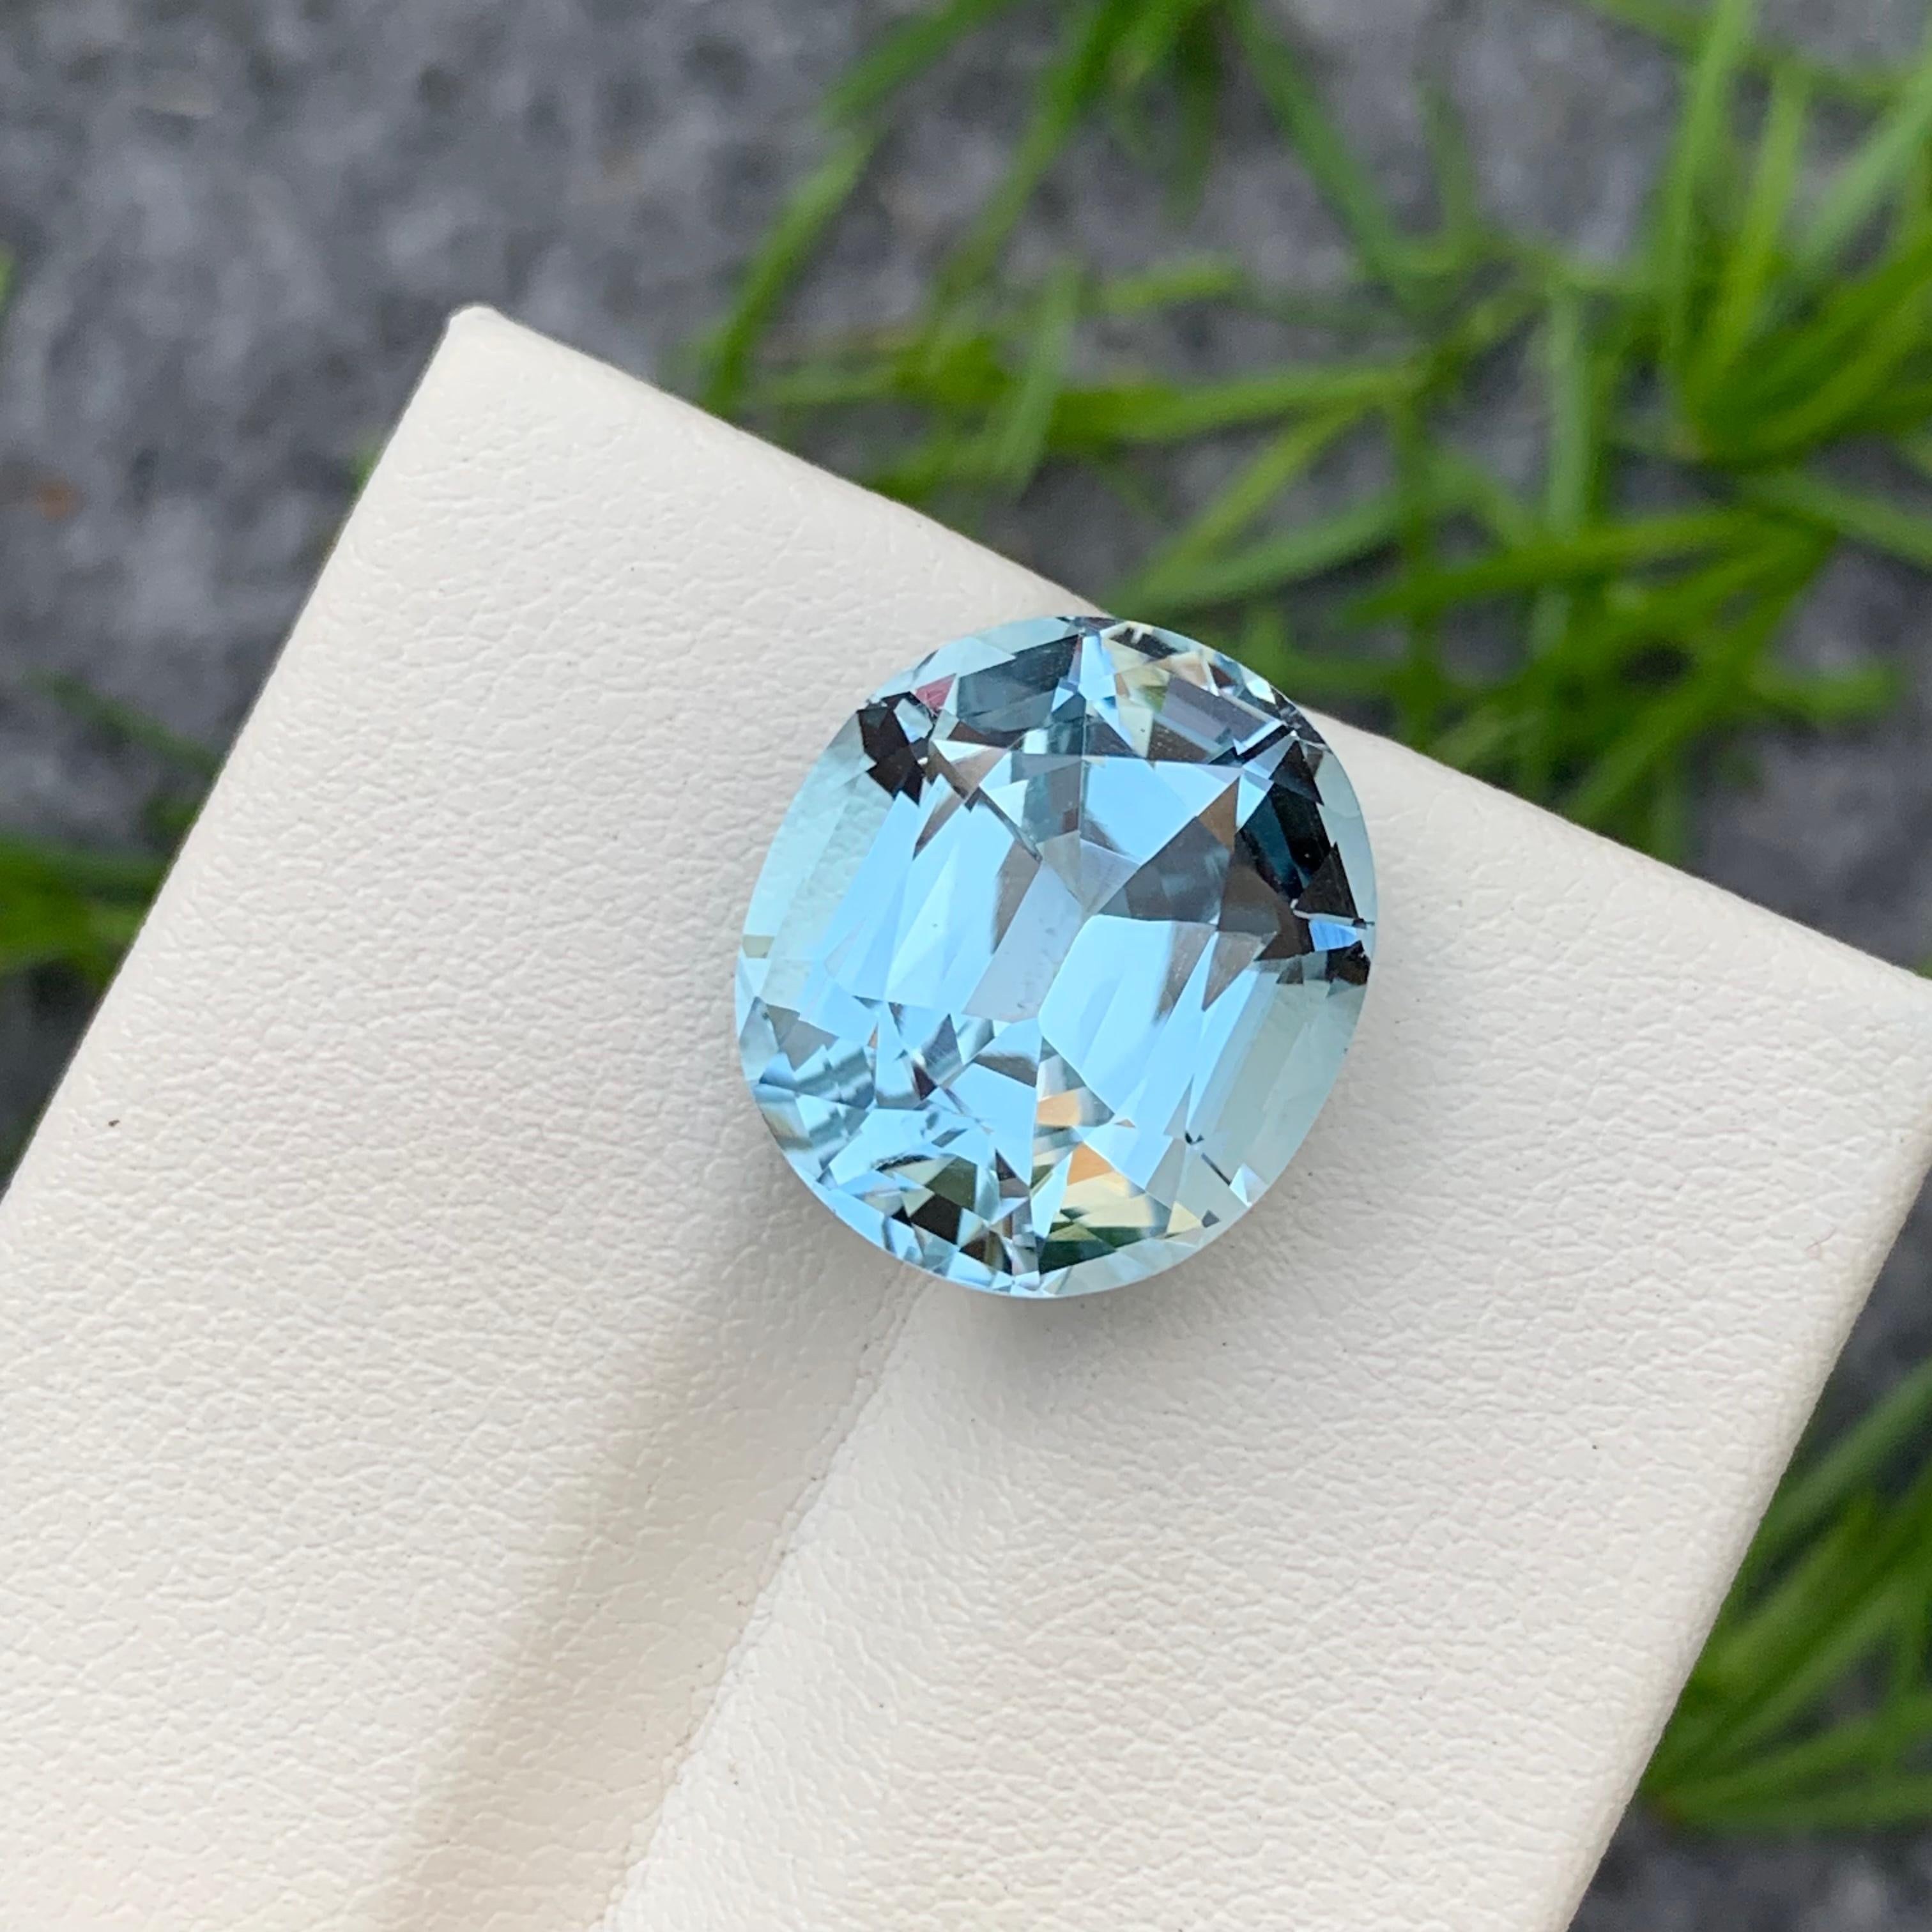 18.75 Carat Faceted Light Blue Topaz Cushion Cut Gemstone from Brazil Mine For Sale 8